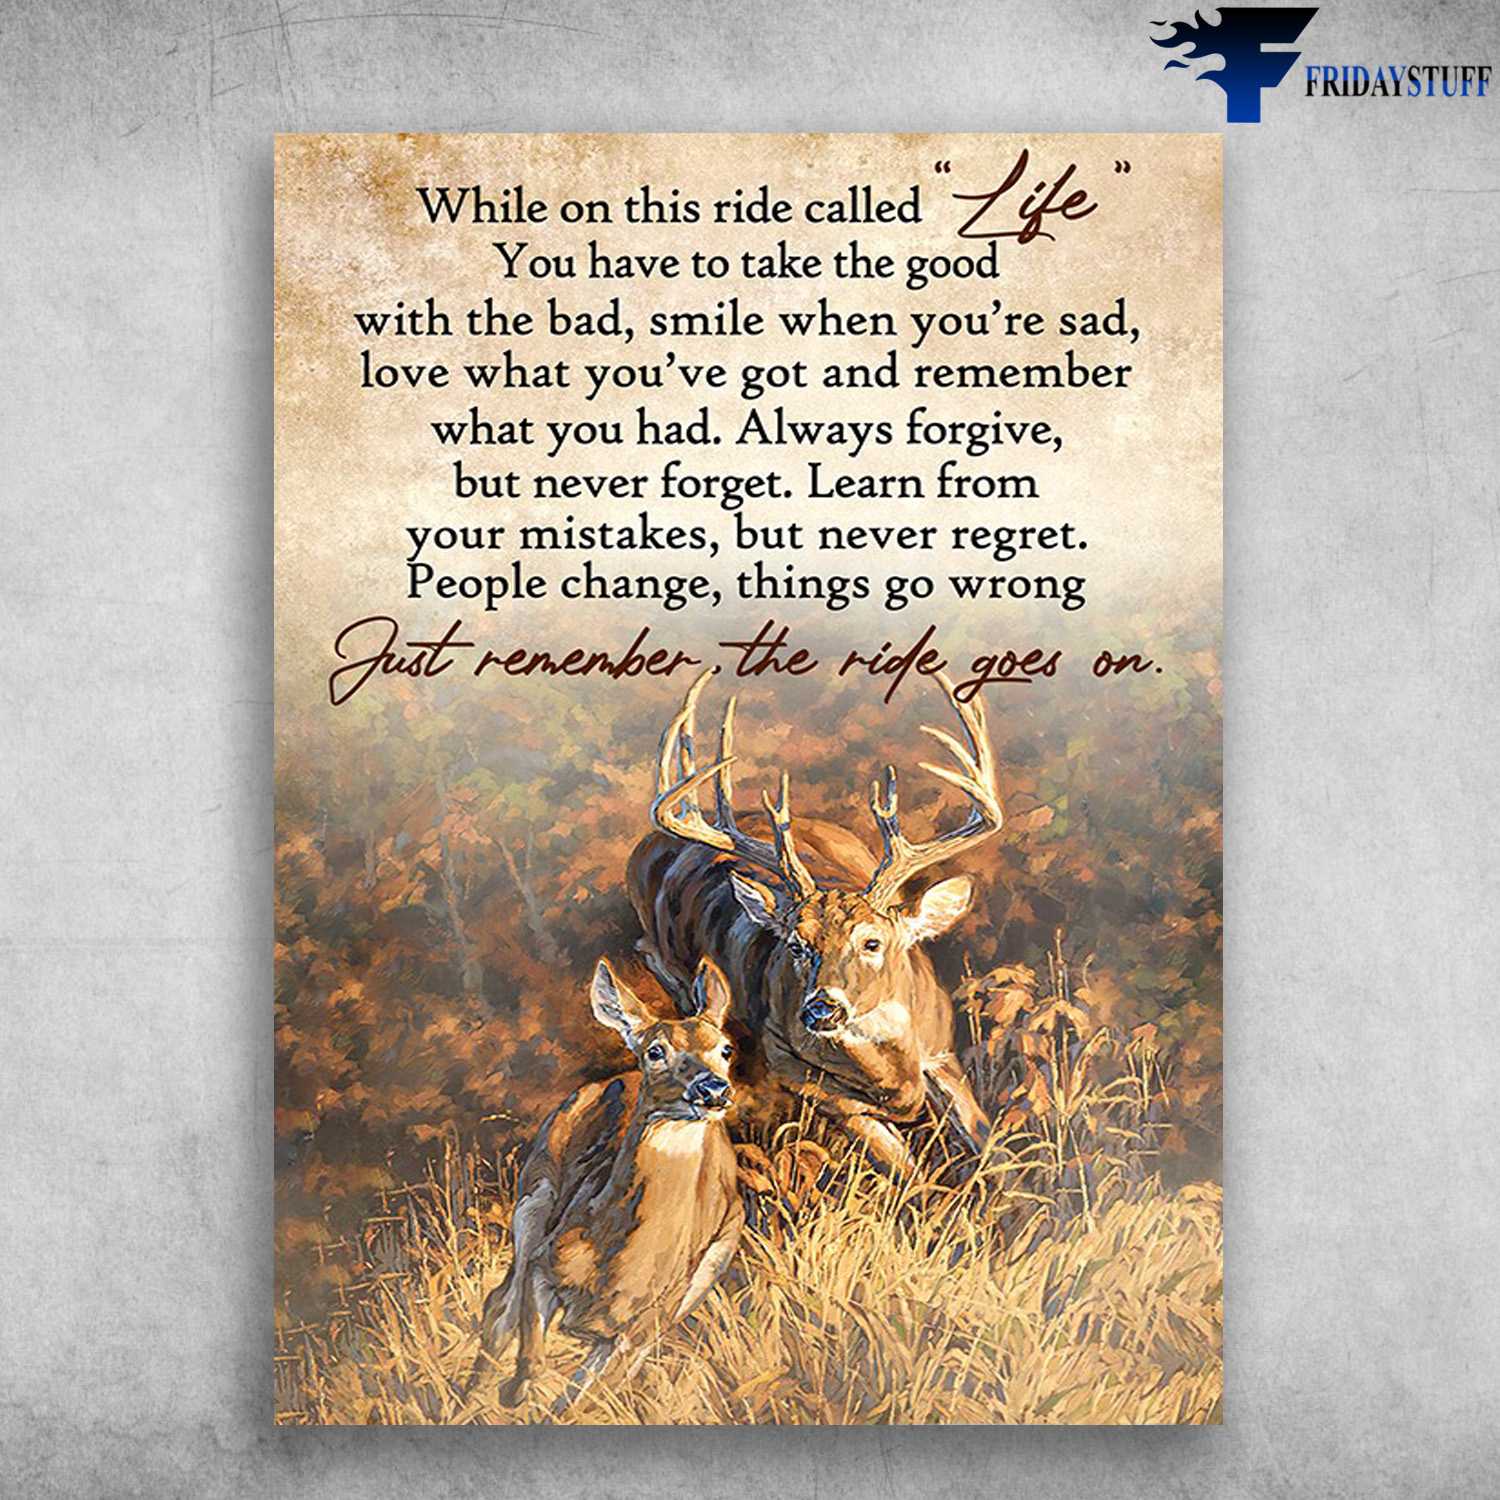 Deer Couple, Love Poster, While On This Ride Called Life, You Have To Take The Good, With The Bad, Smile When You're Sad, Love What You've Got, And Remember What You Had